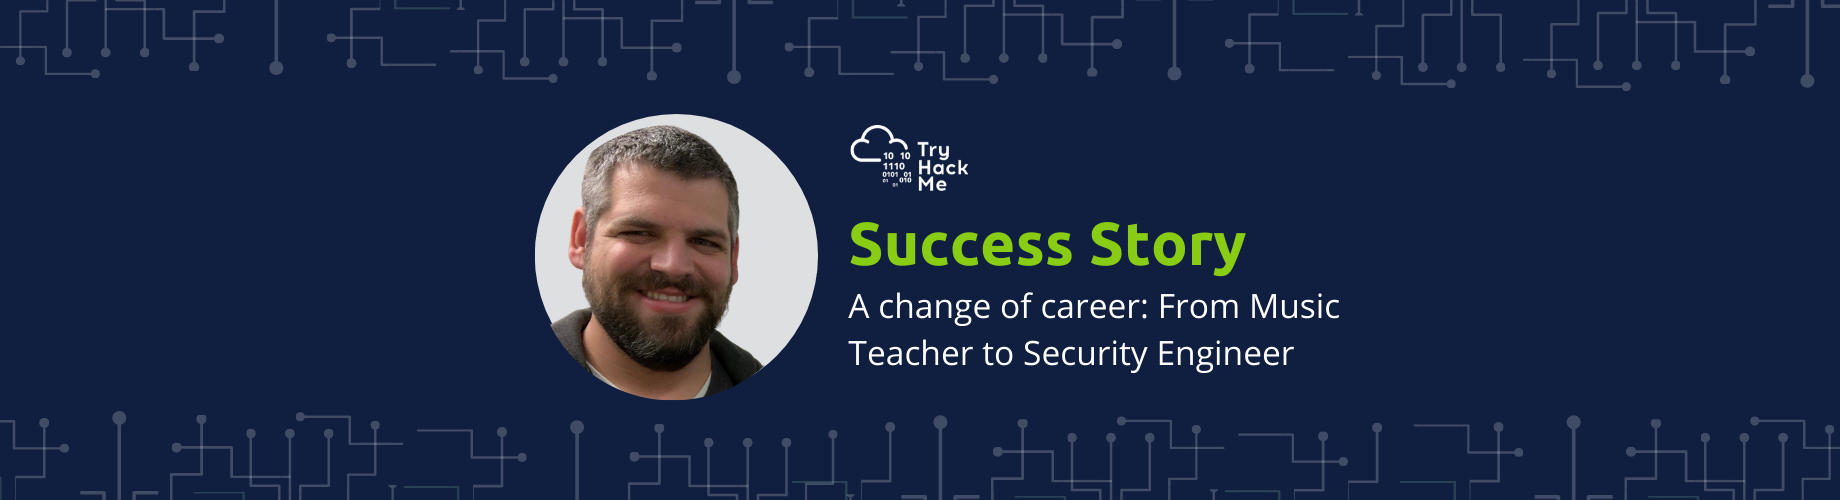 Music Teacher to Security Engineer - Michael’s Success Story